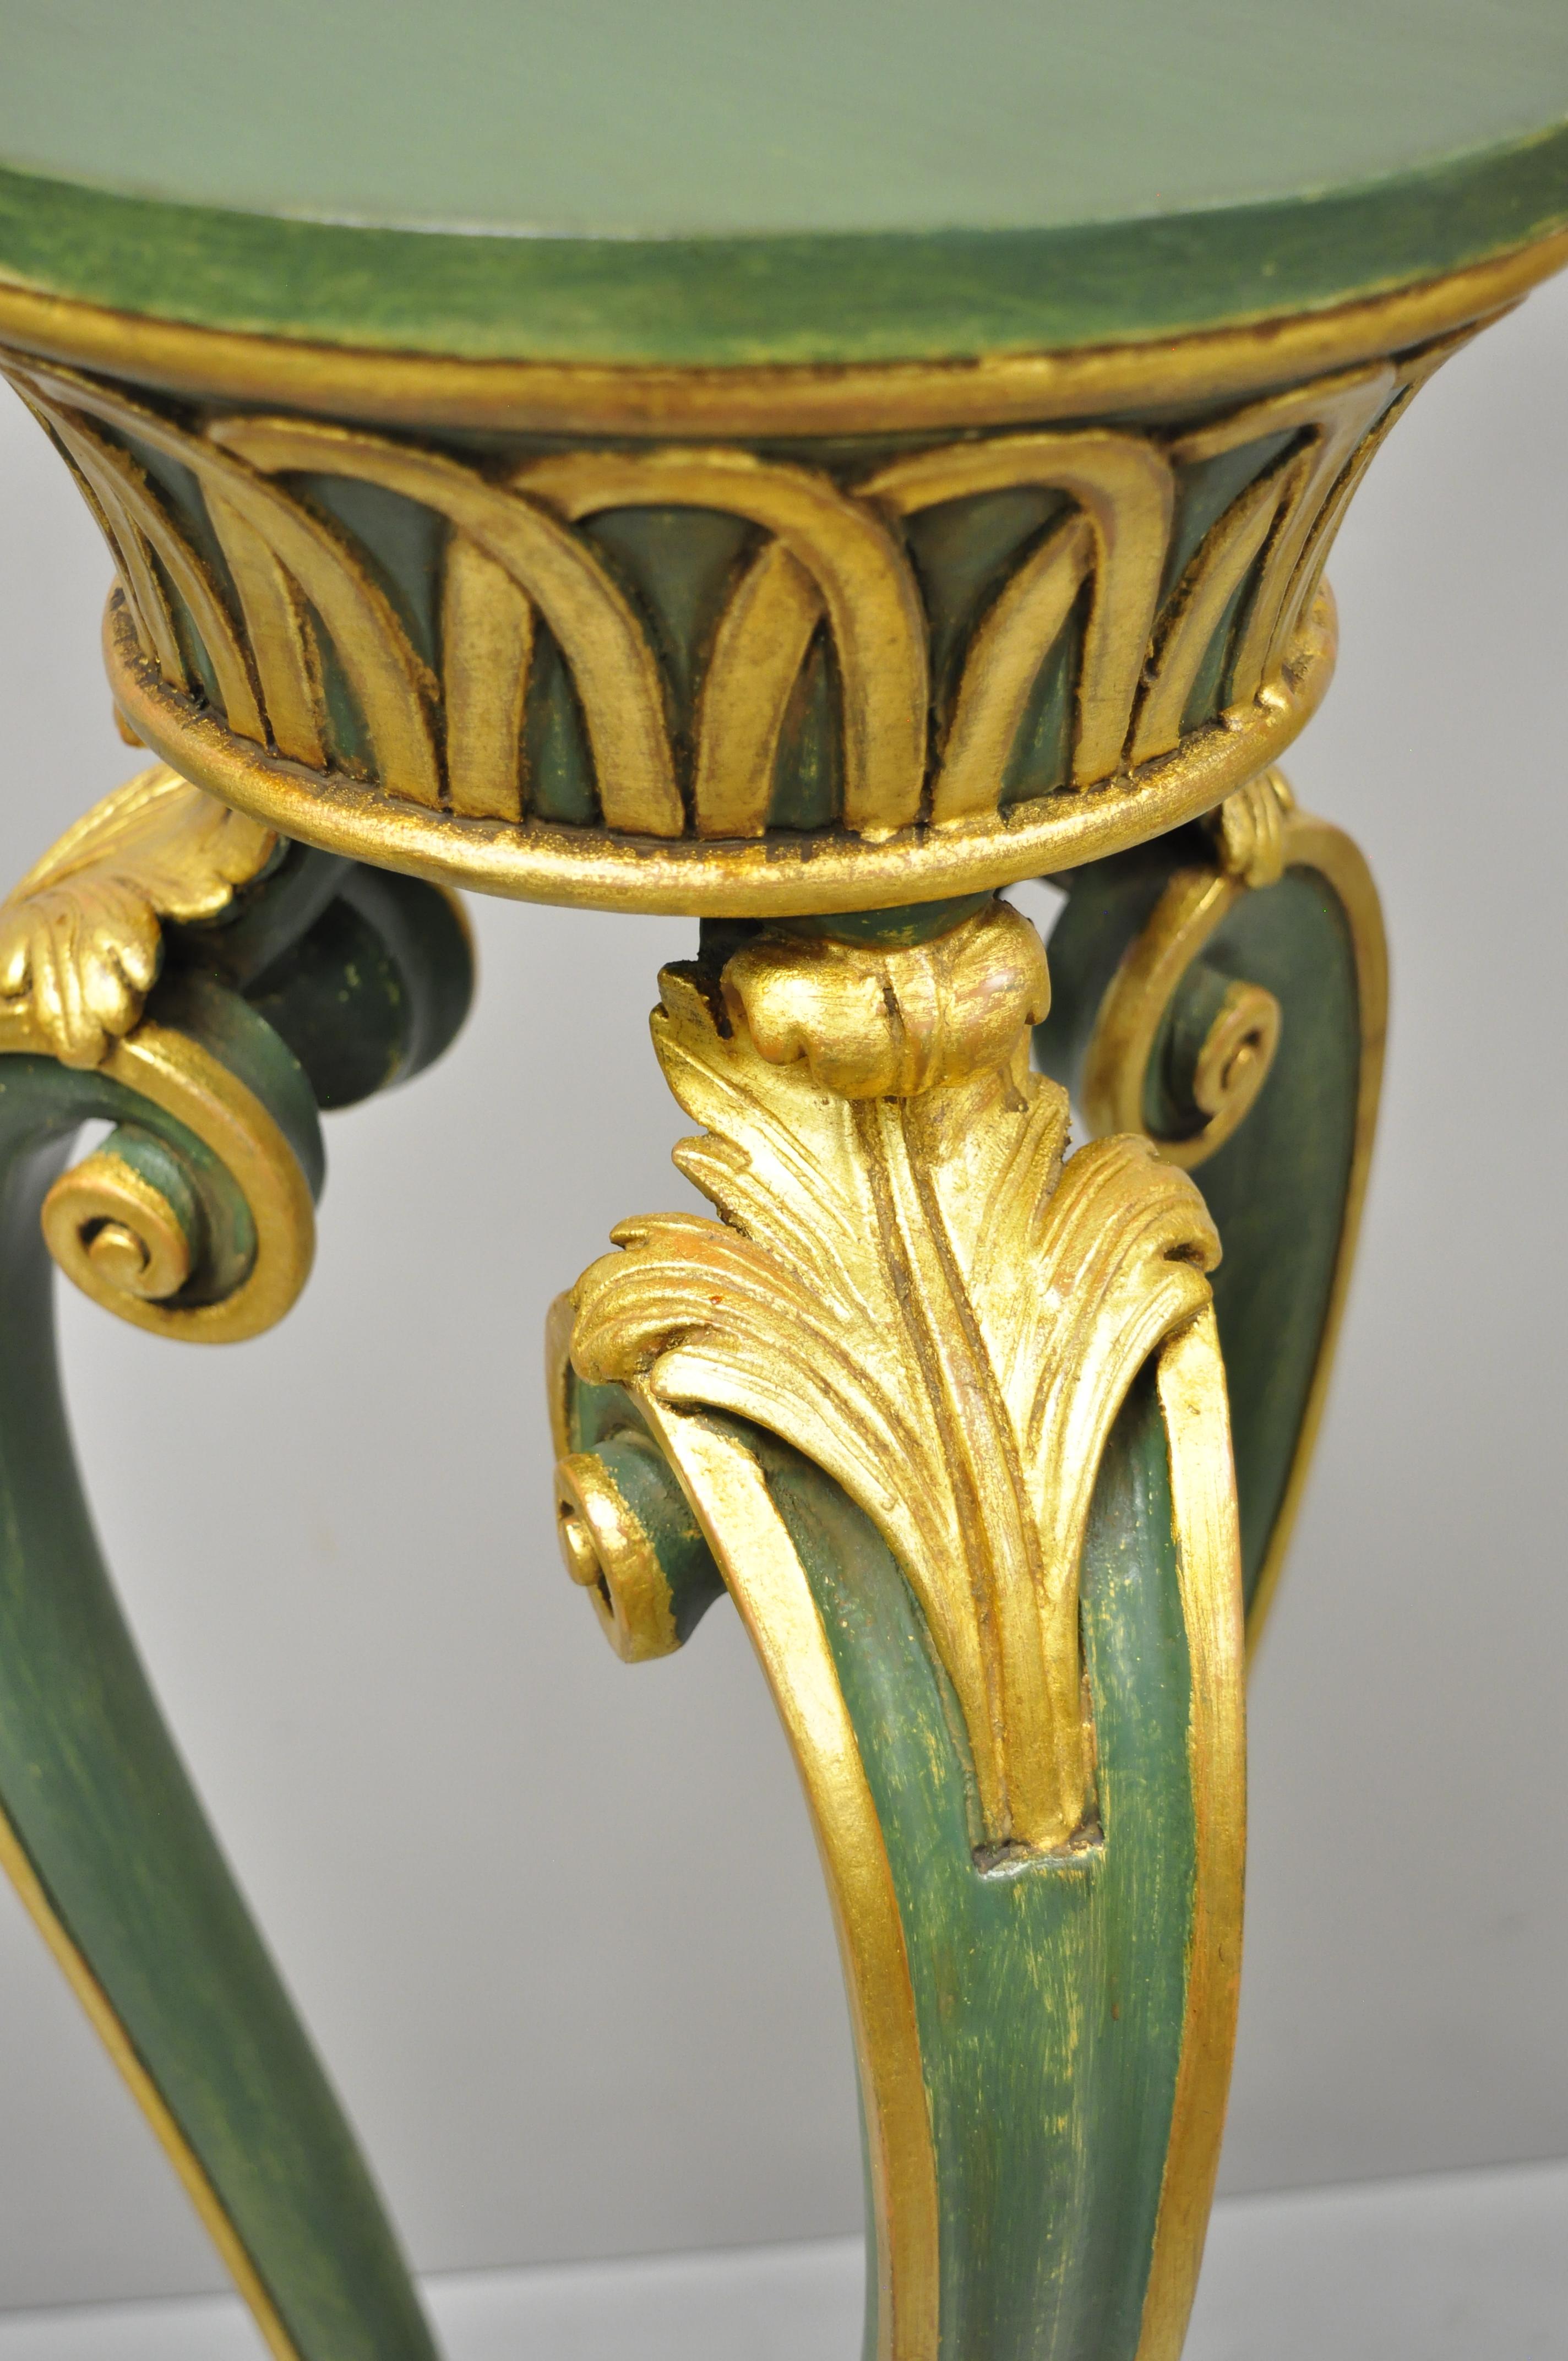 2 Vintage French Regency Neoclassical Style Green & Gold Paw Foot Italian Stands 1